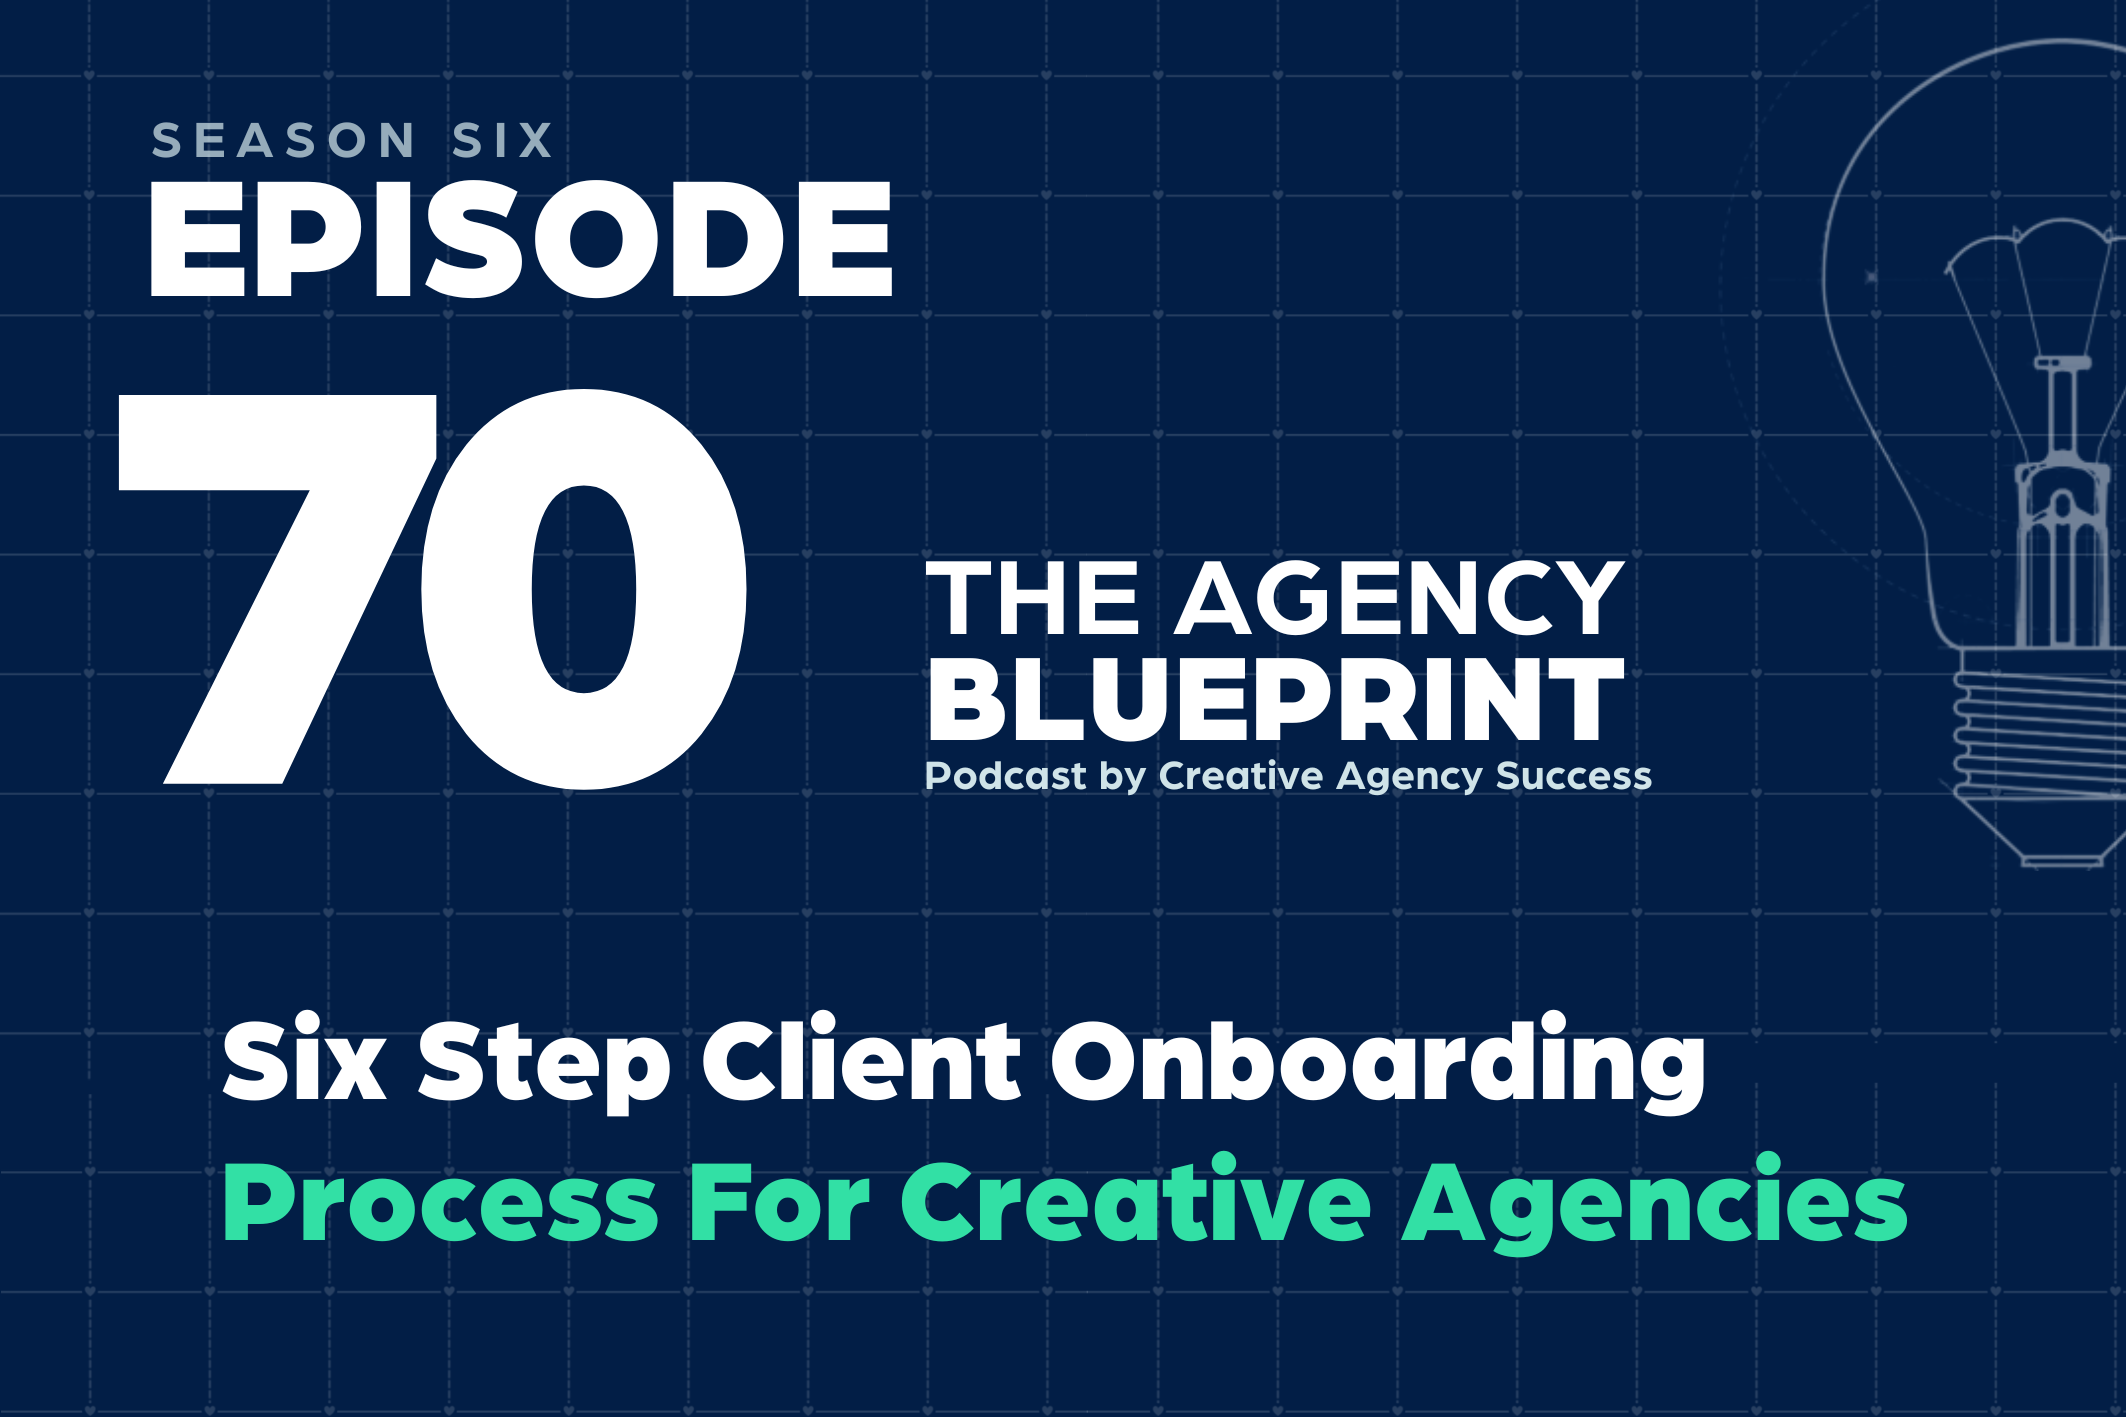 6 Ep 70 | Six Step Client Onboarding Process for Agencies